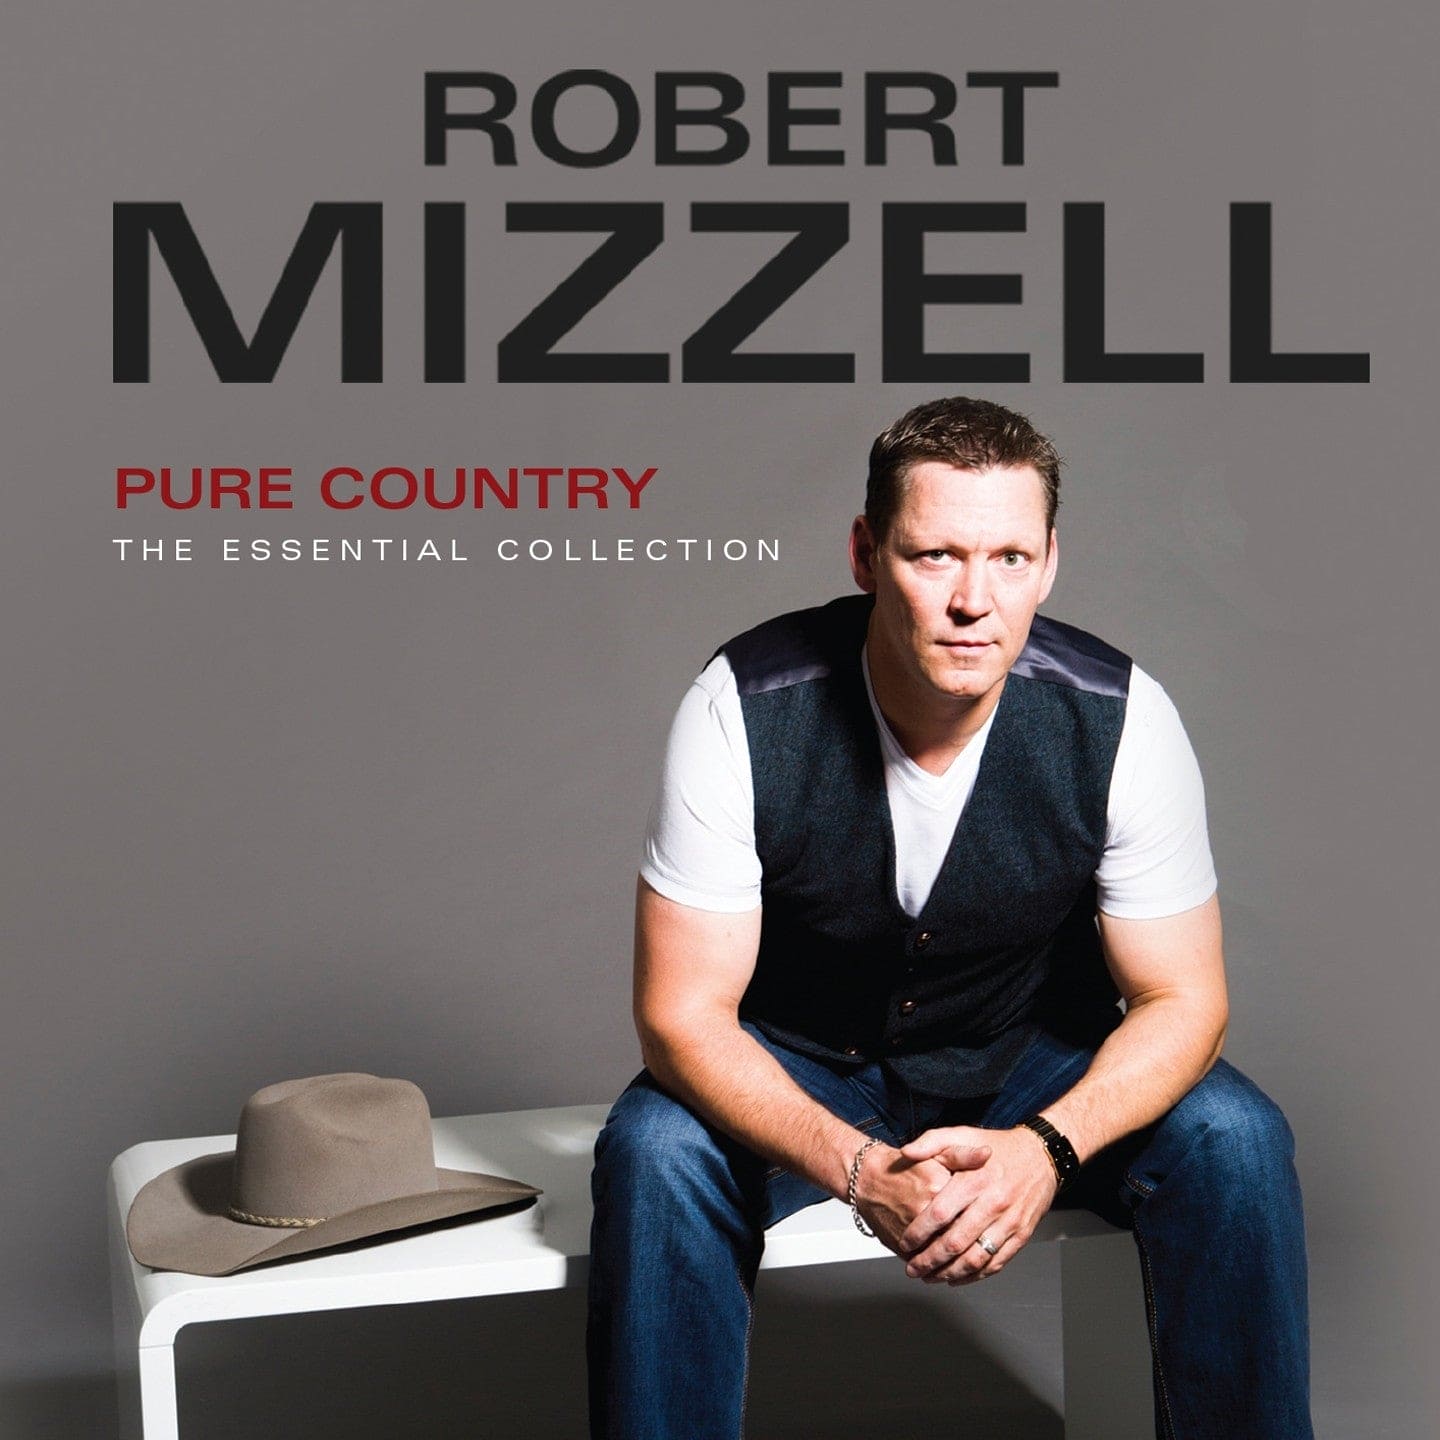 Pure Country (The Essential Collection) - Robert Mizzell [2CD]